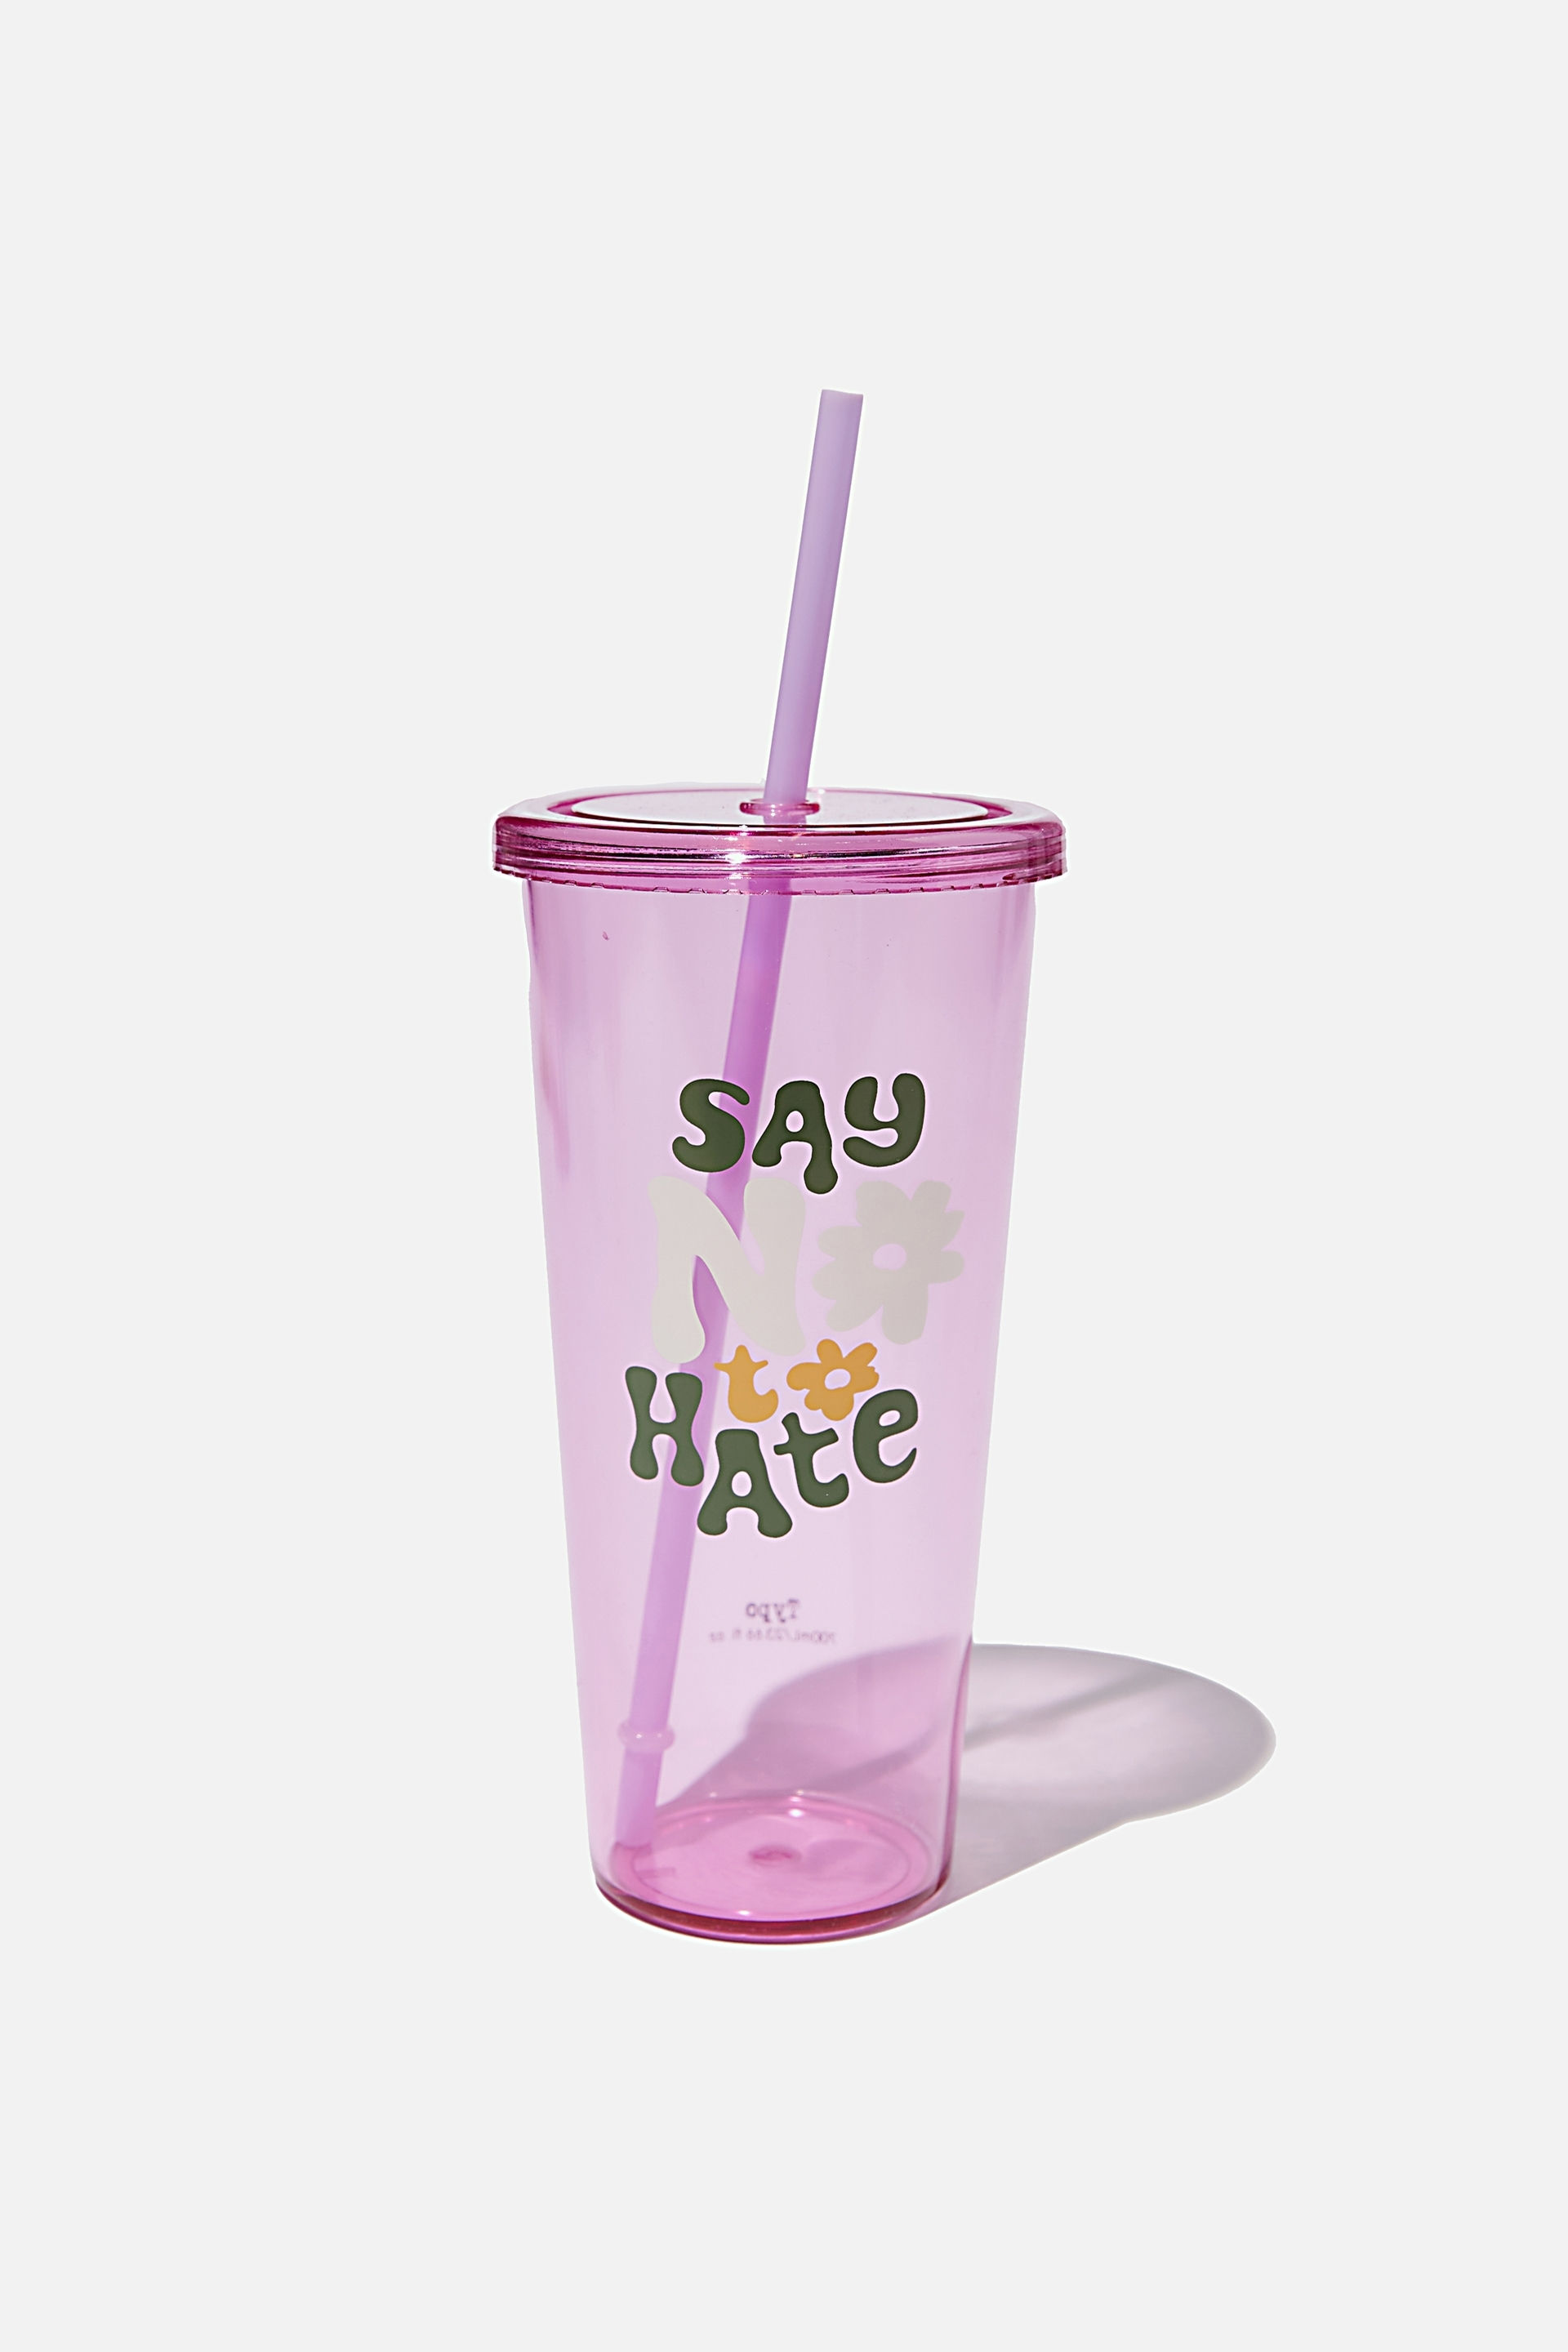 Typo - Sipper Smoothie Cup - Say no to hate